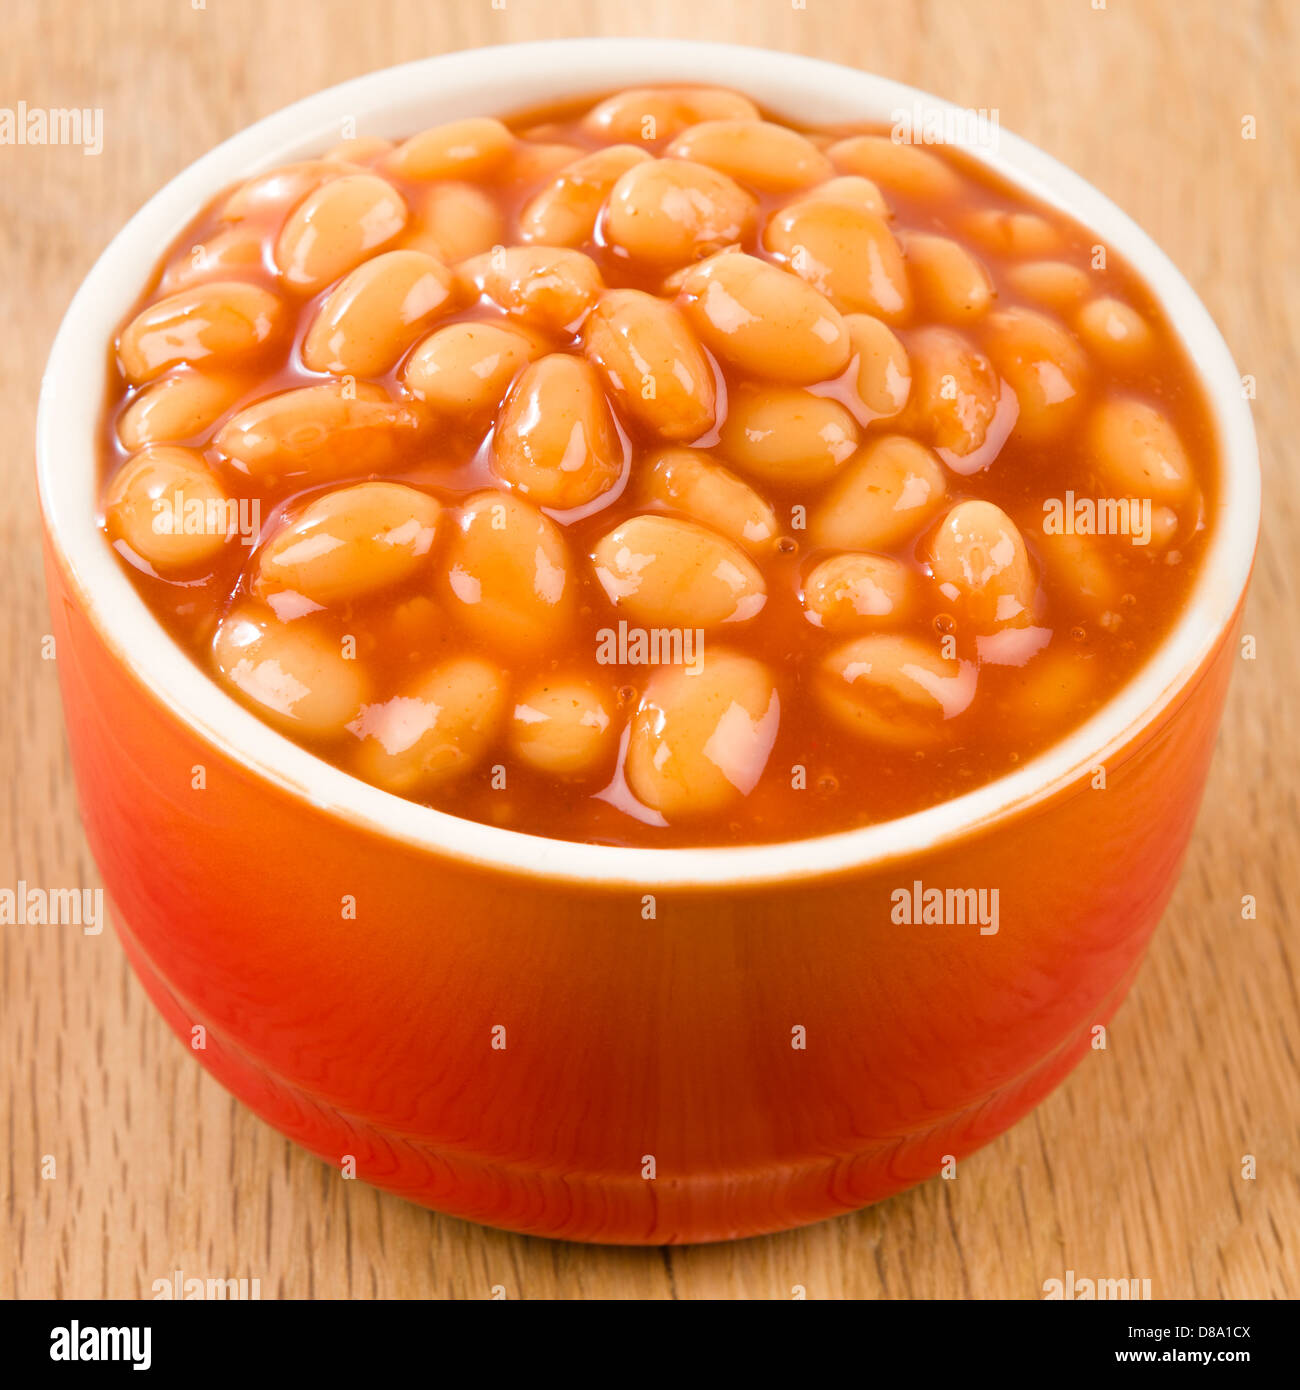 Baked Beans - Bowl of baked beans in tomato sauce. Stock Photo